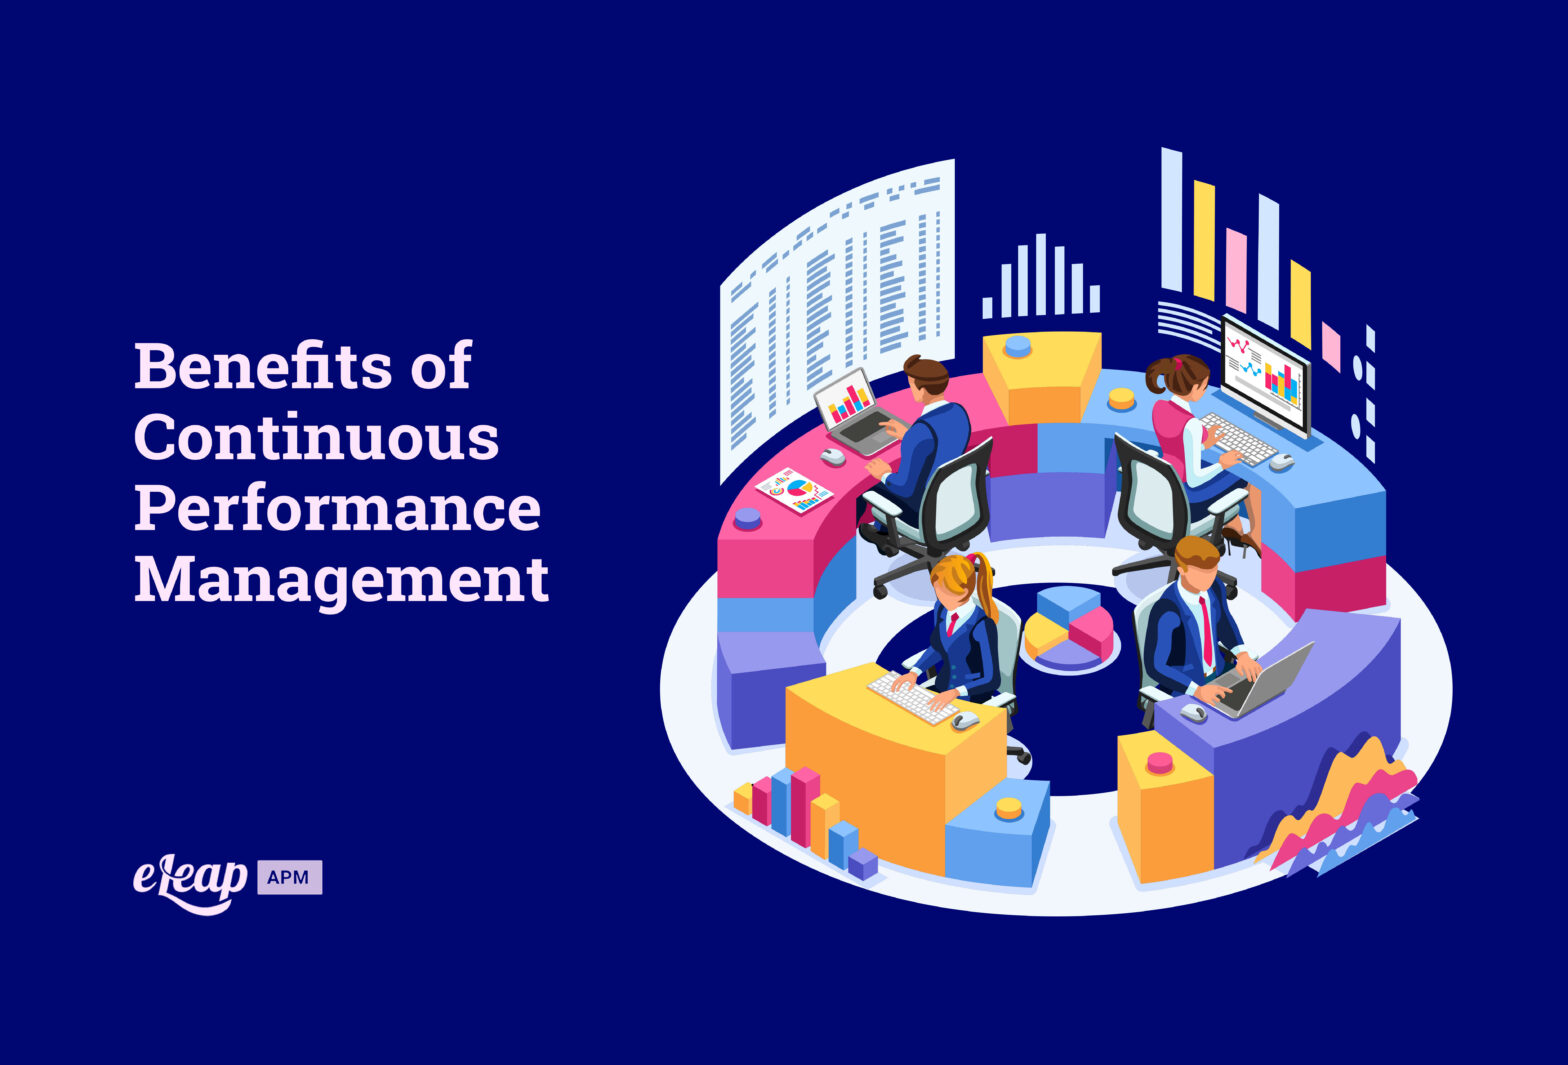 Benefits of Continuous Performance Management